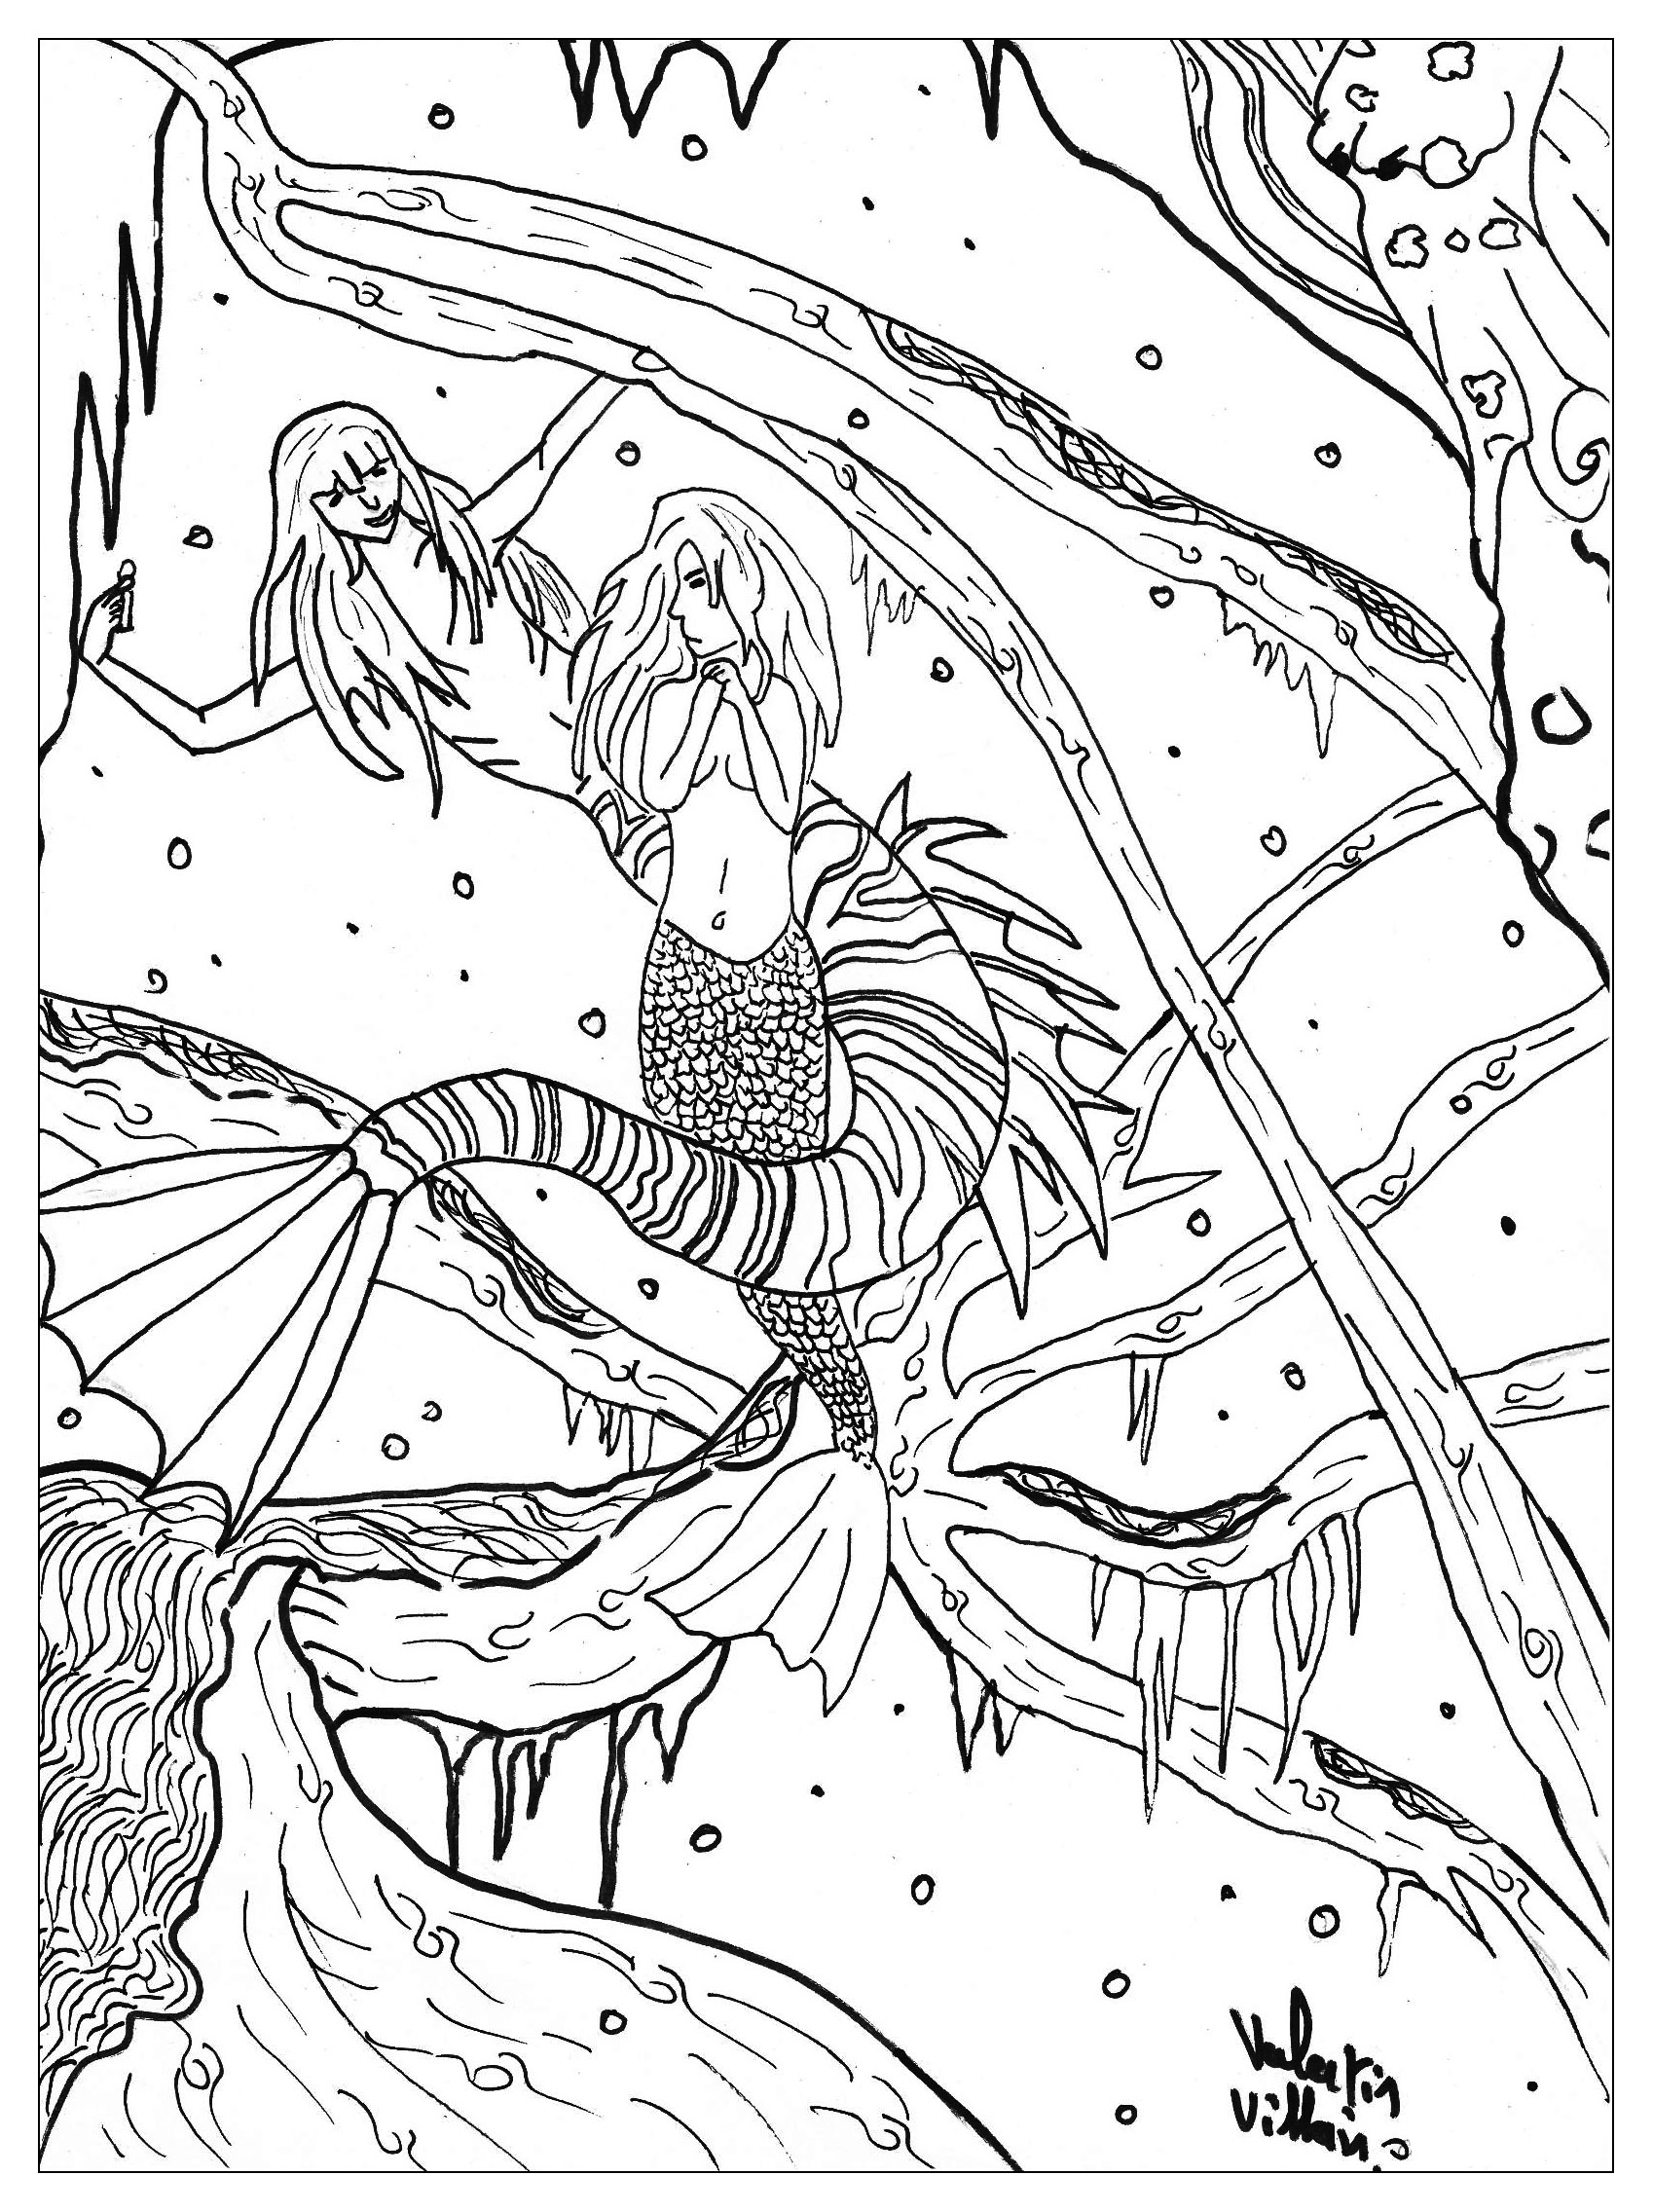 Little mermaid - Allan - Coloring Pages for Adults